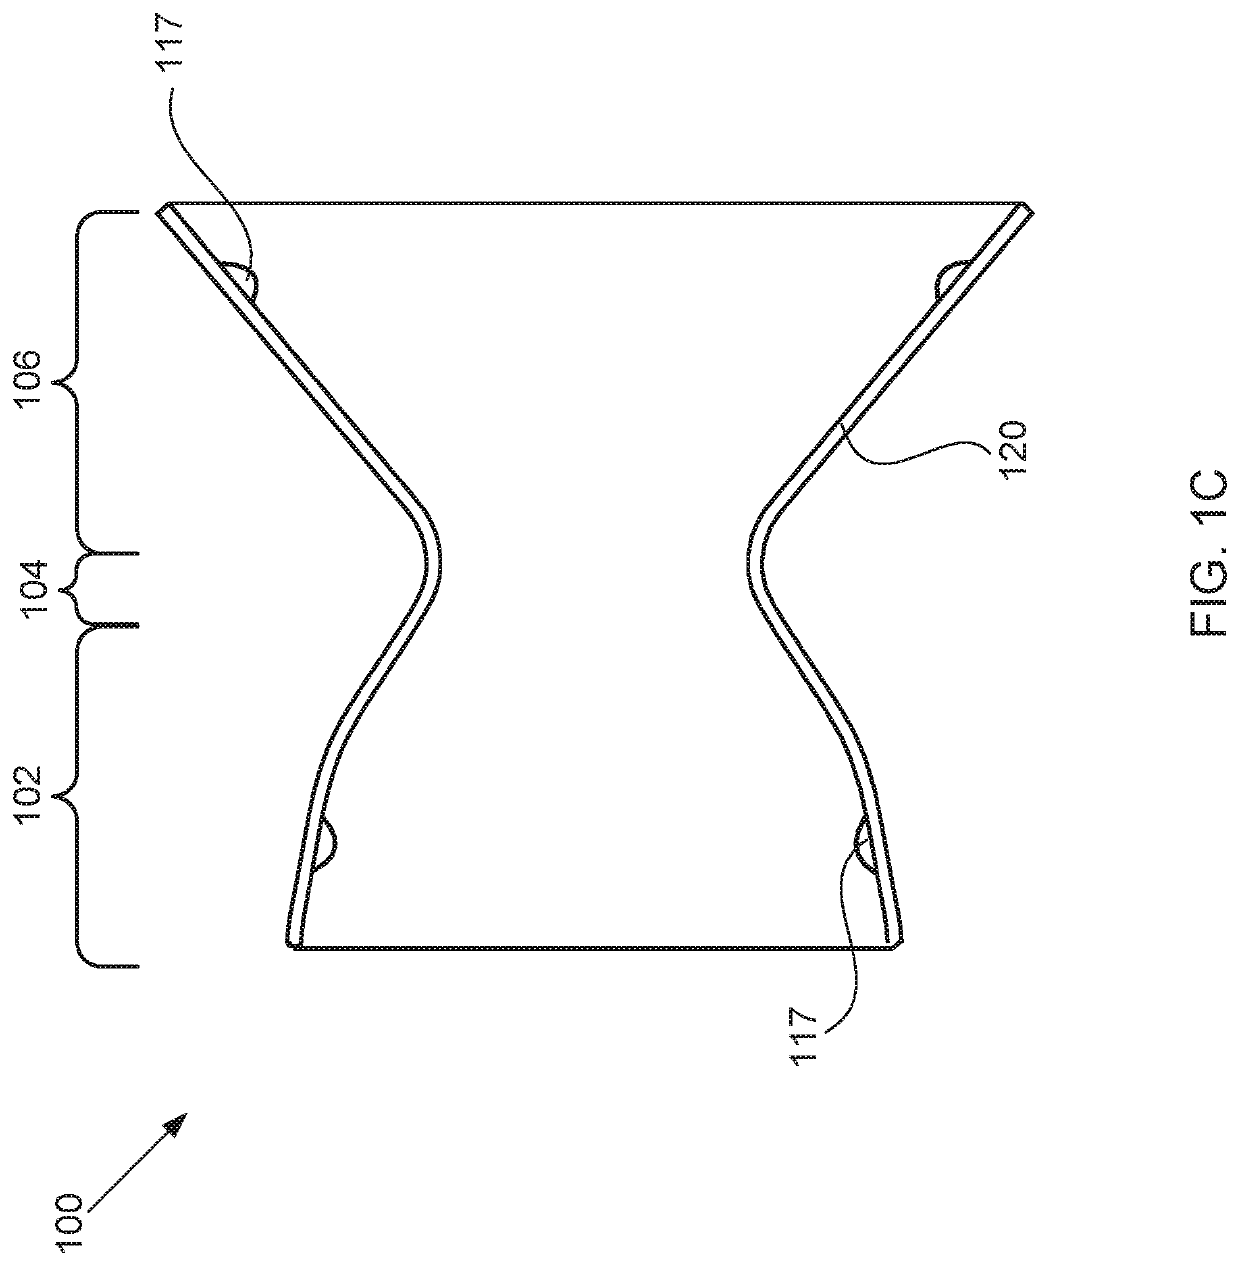 Interatrial shunts having biodegradable material, and methods of making and using same